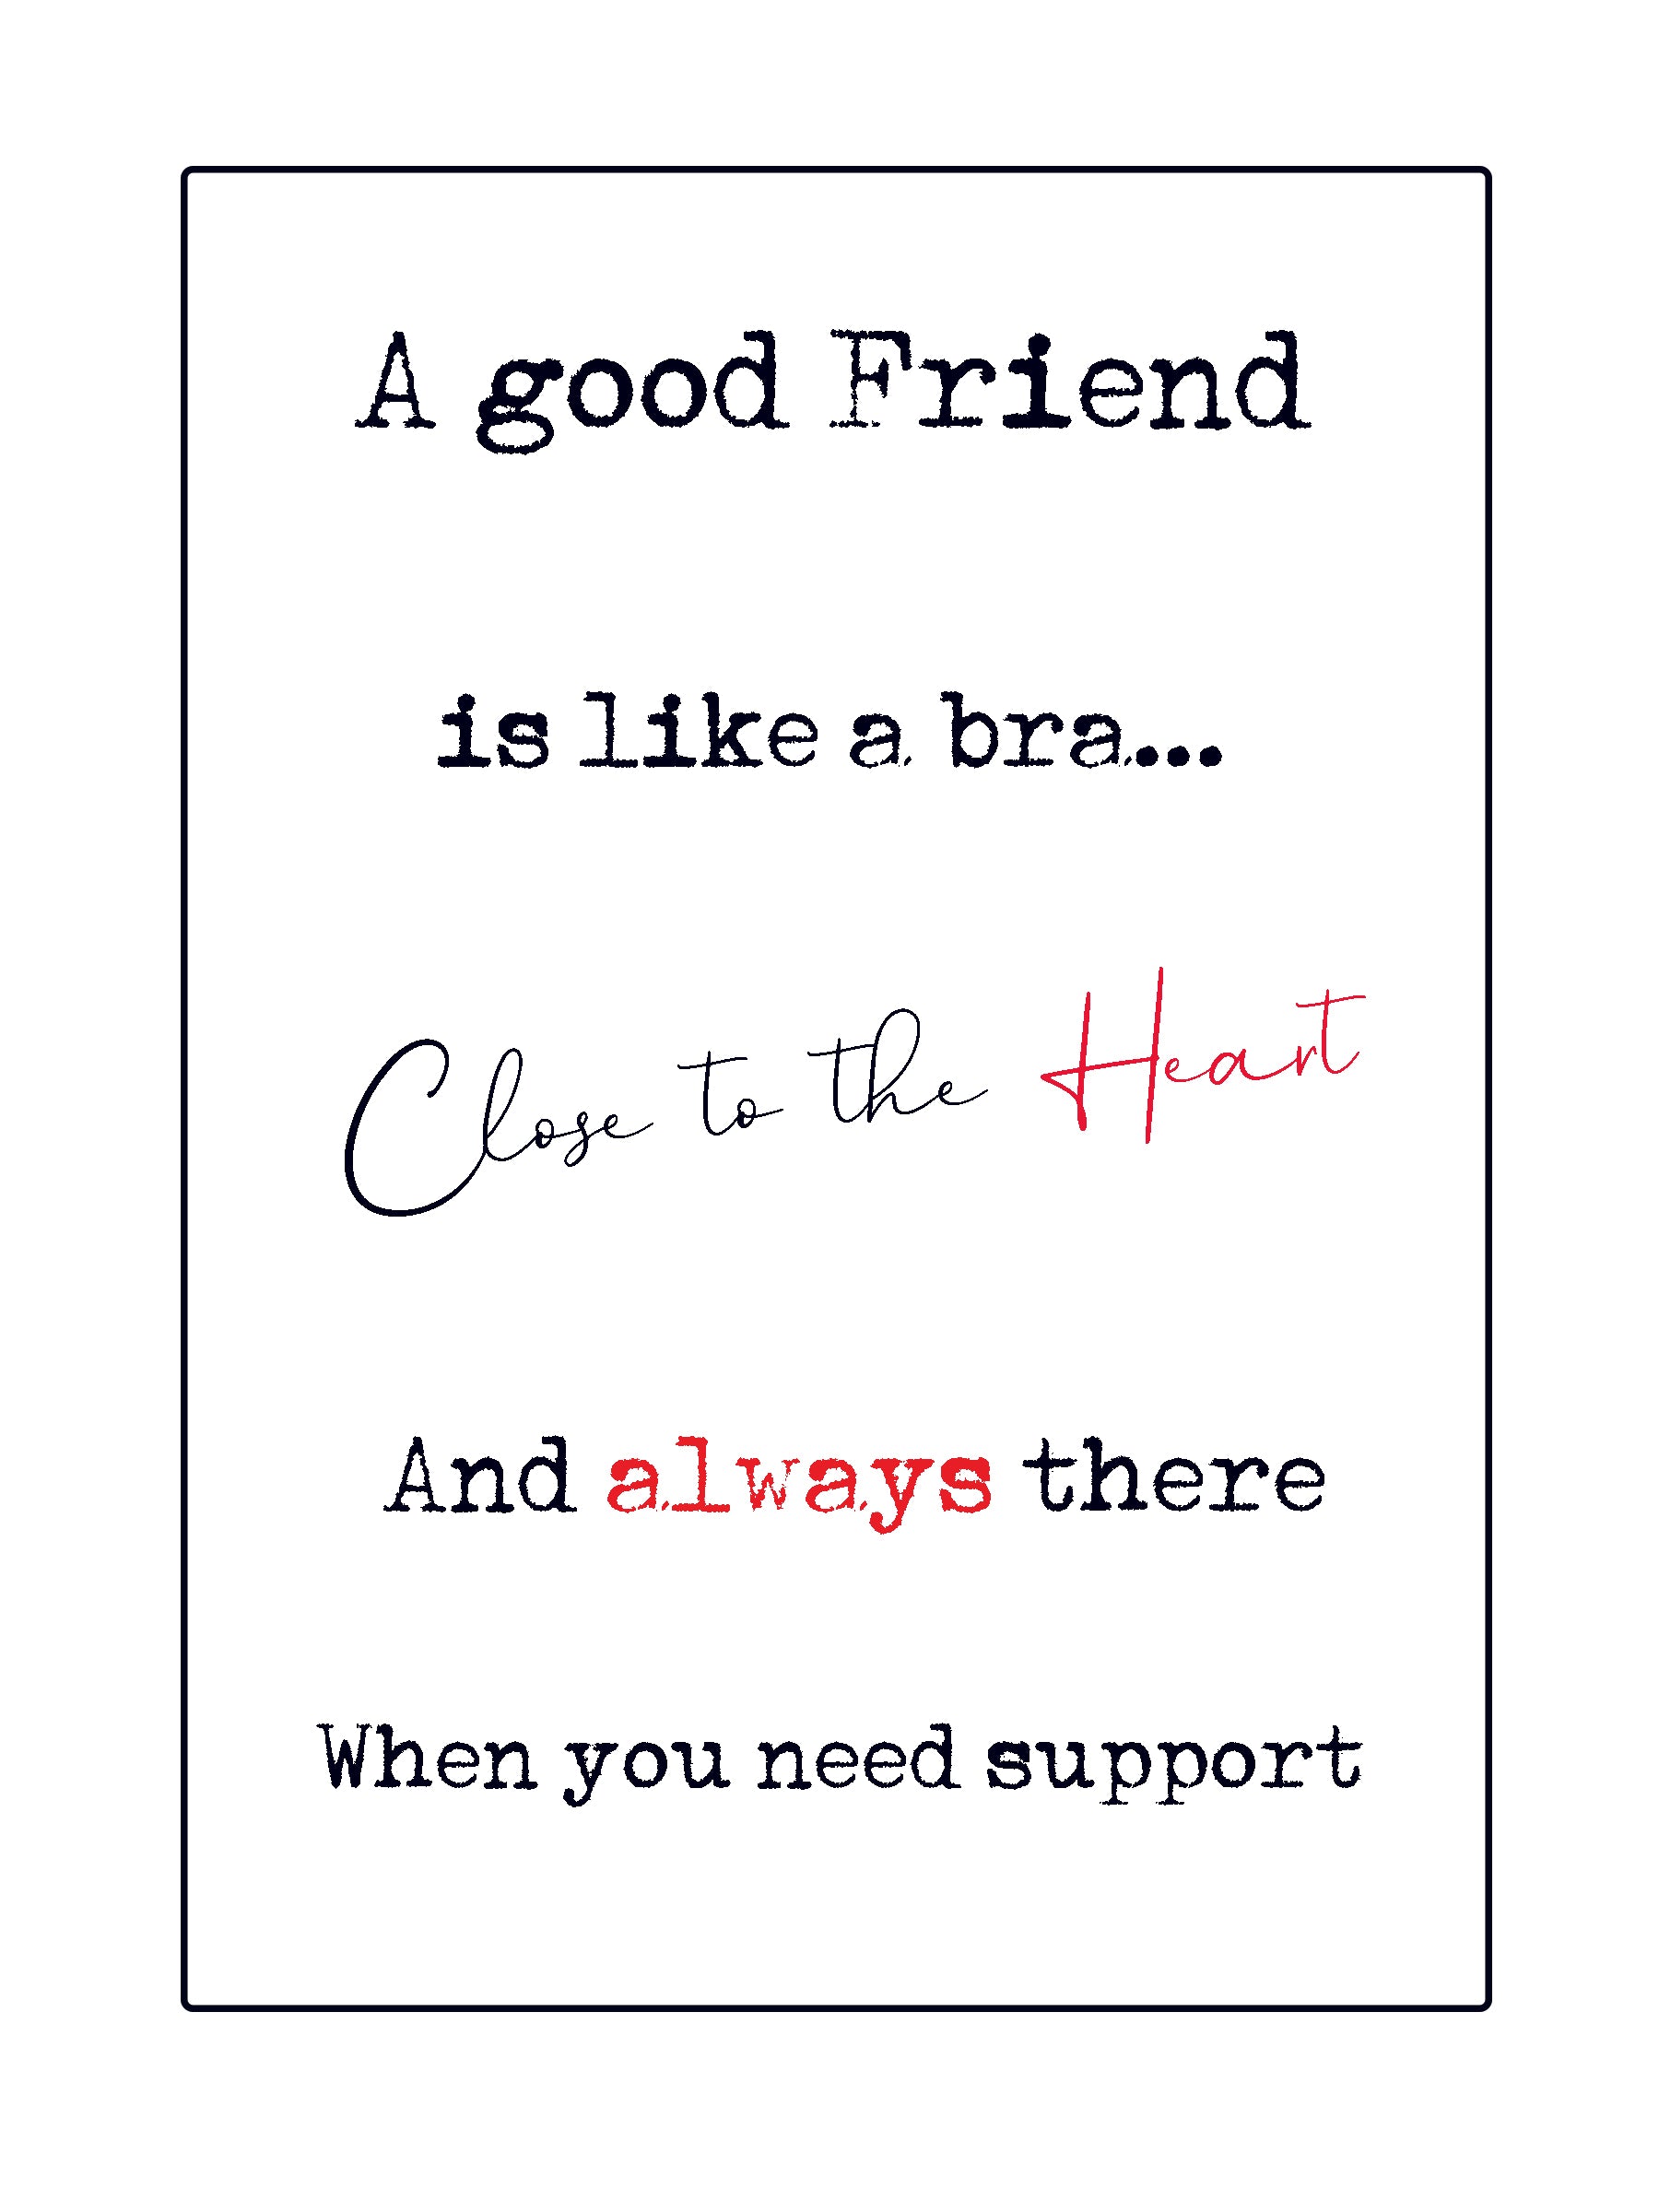 Quick Quotes. A good friend is like a bra – PictureMyPast